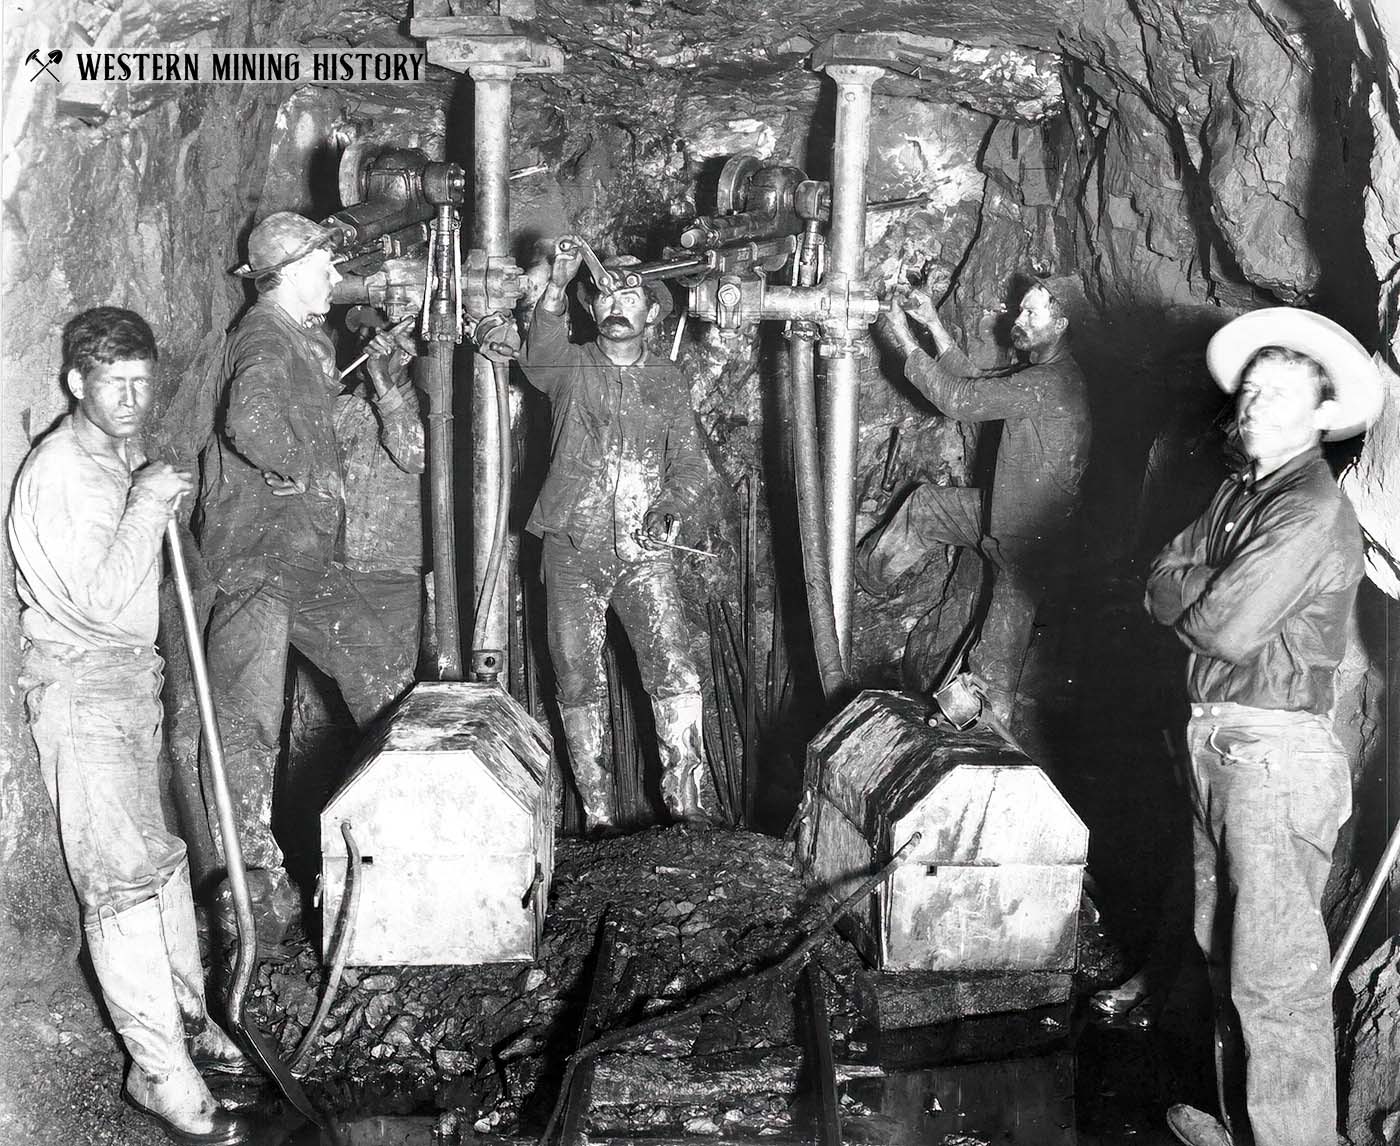 Miners underground at a Clifton-Morenci area copper mine